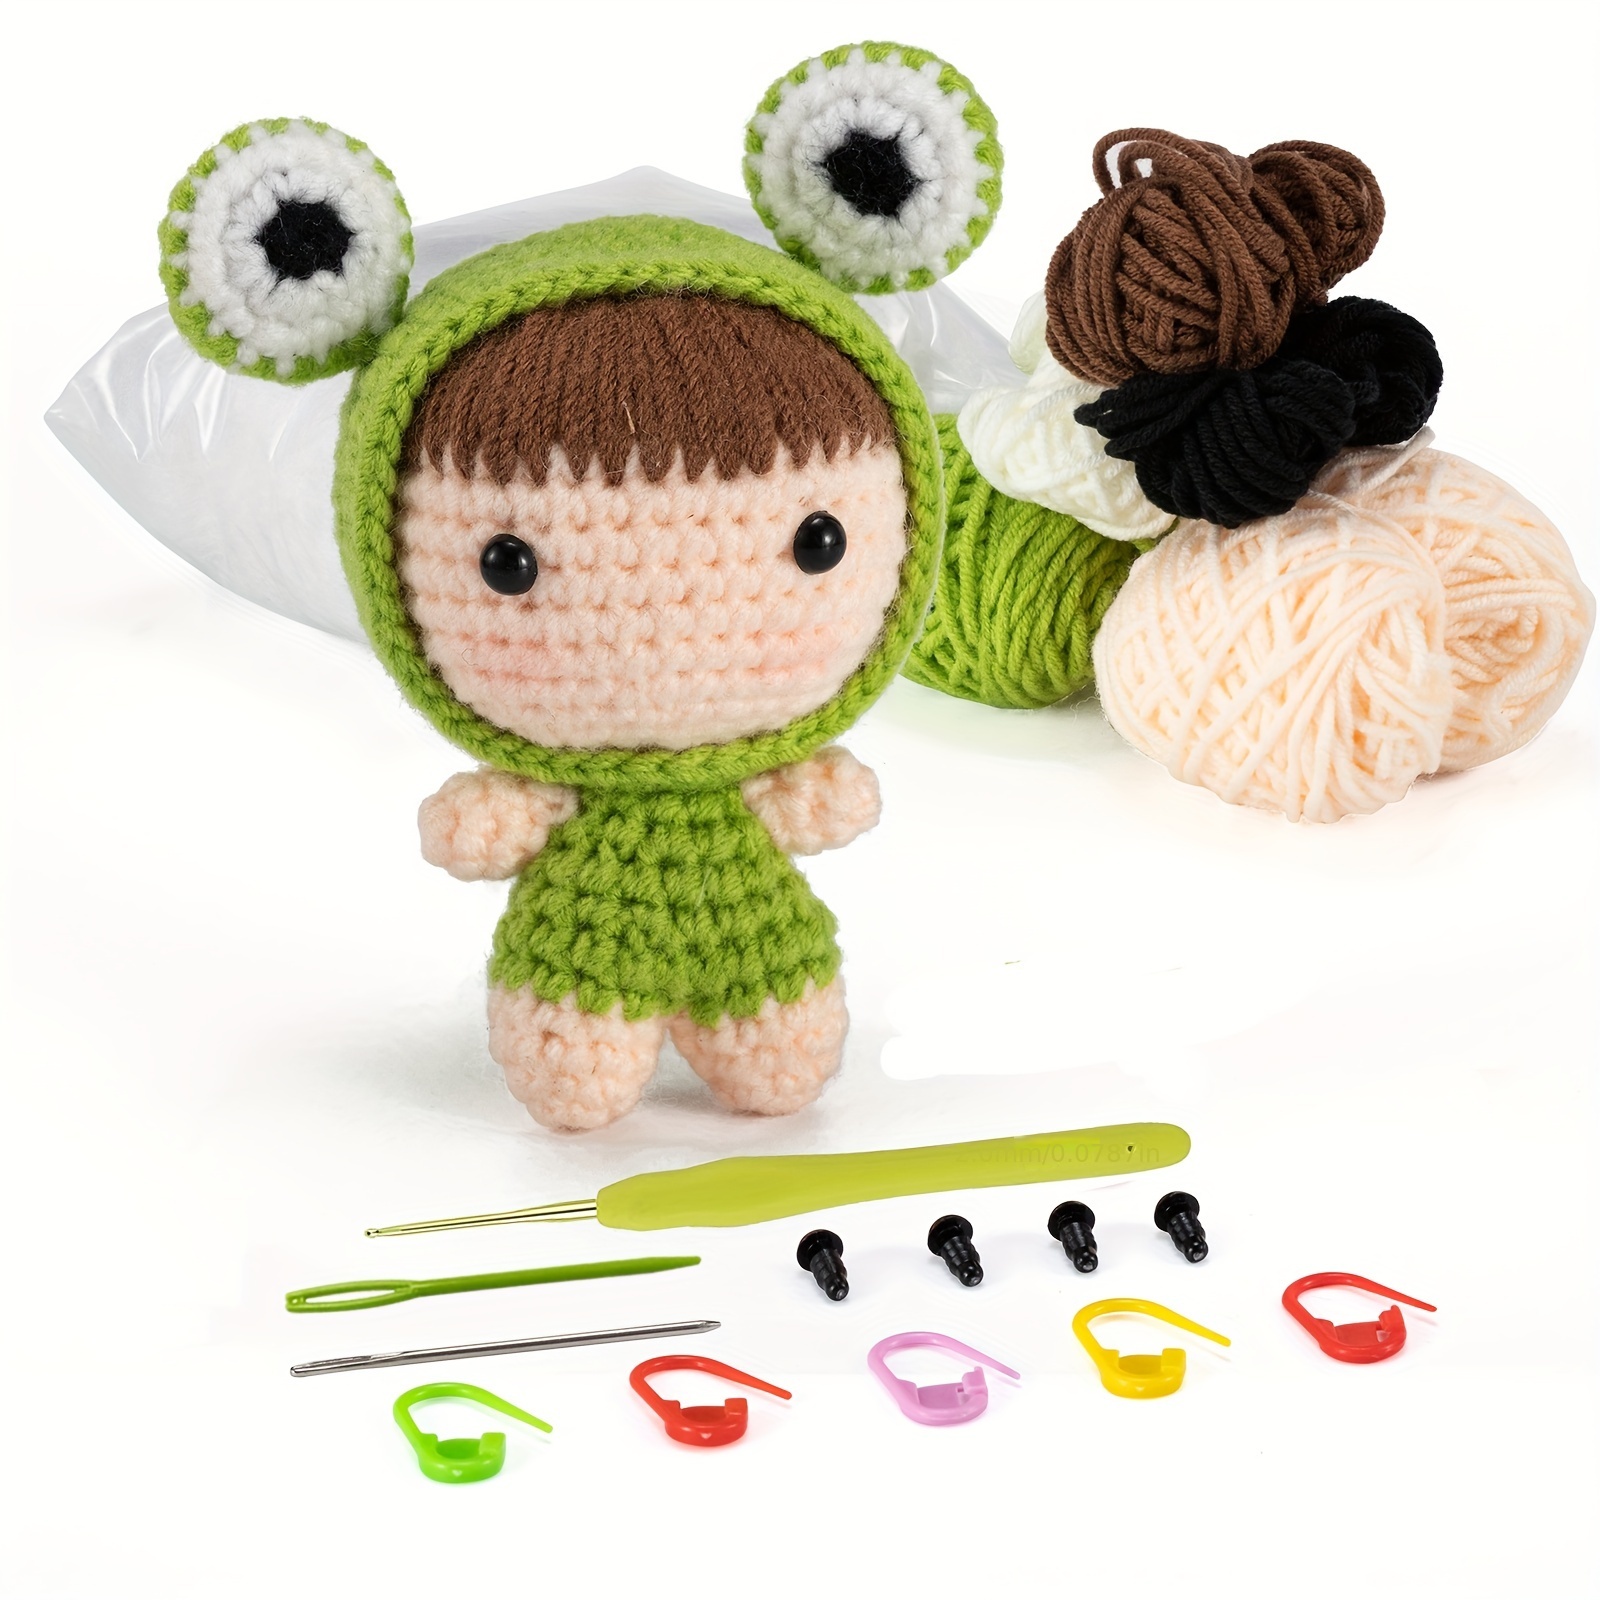 I Taught Myself Crochet Kit for Beginners - Crochet Kits at Weekend Kits